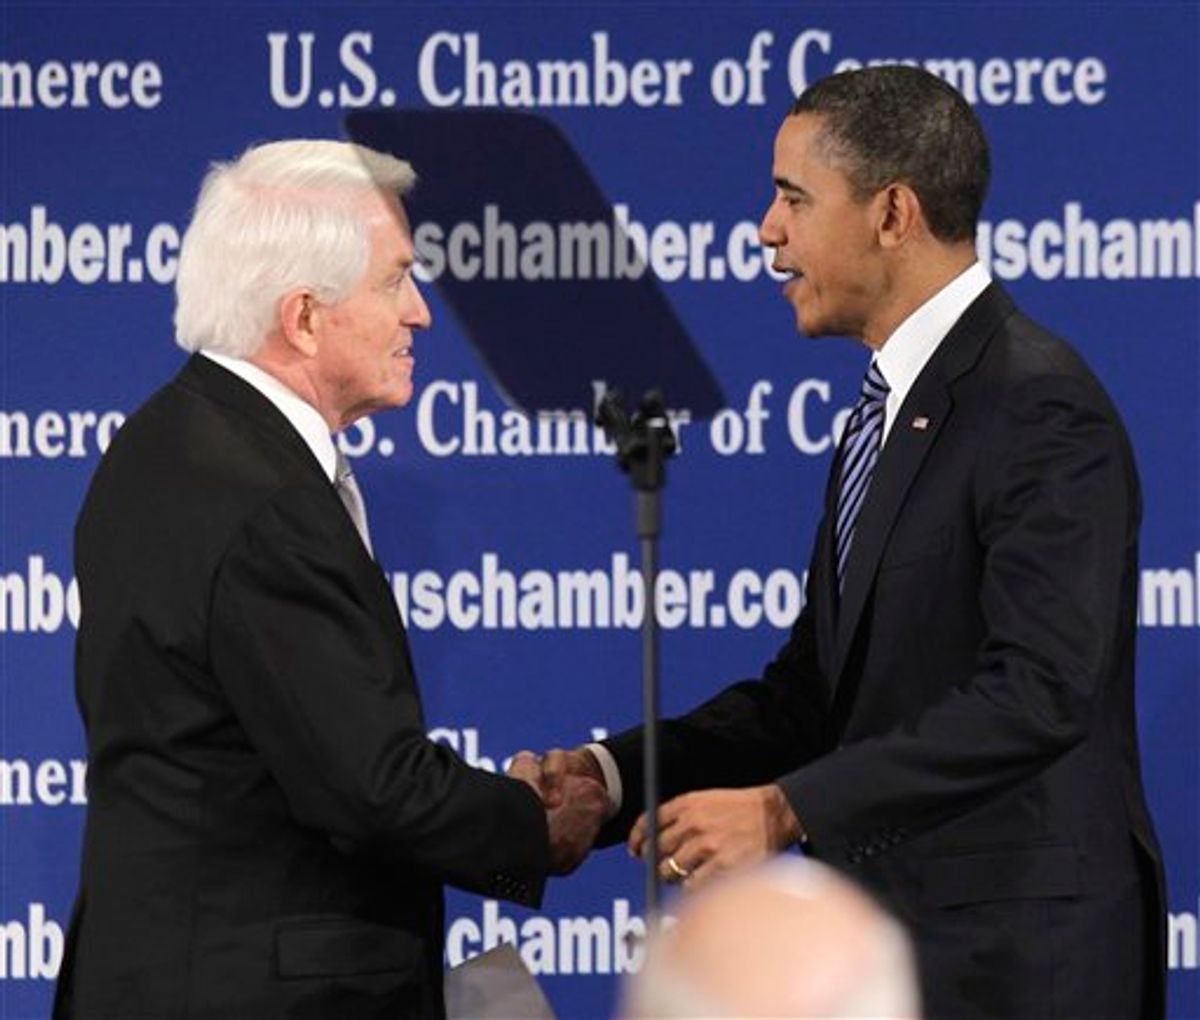 President Barack Obama is introduced by U.S. Chamber of Commerce President and CEO Thomas Donohue before speaking at the U.S. Chamber of Commerce in Washington, Monday, Feb. 7, 2011. (AP Photo/Charles Dharapak)     (AP)